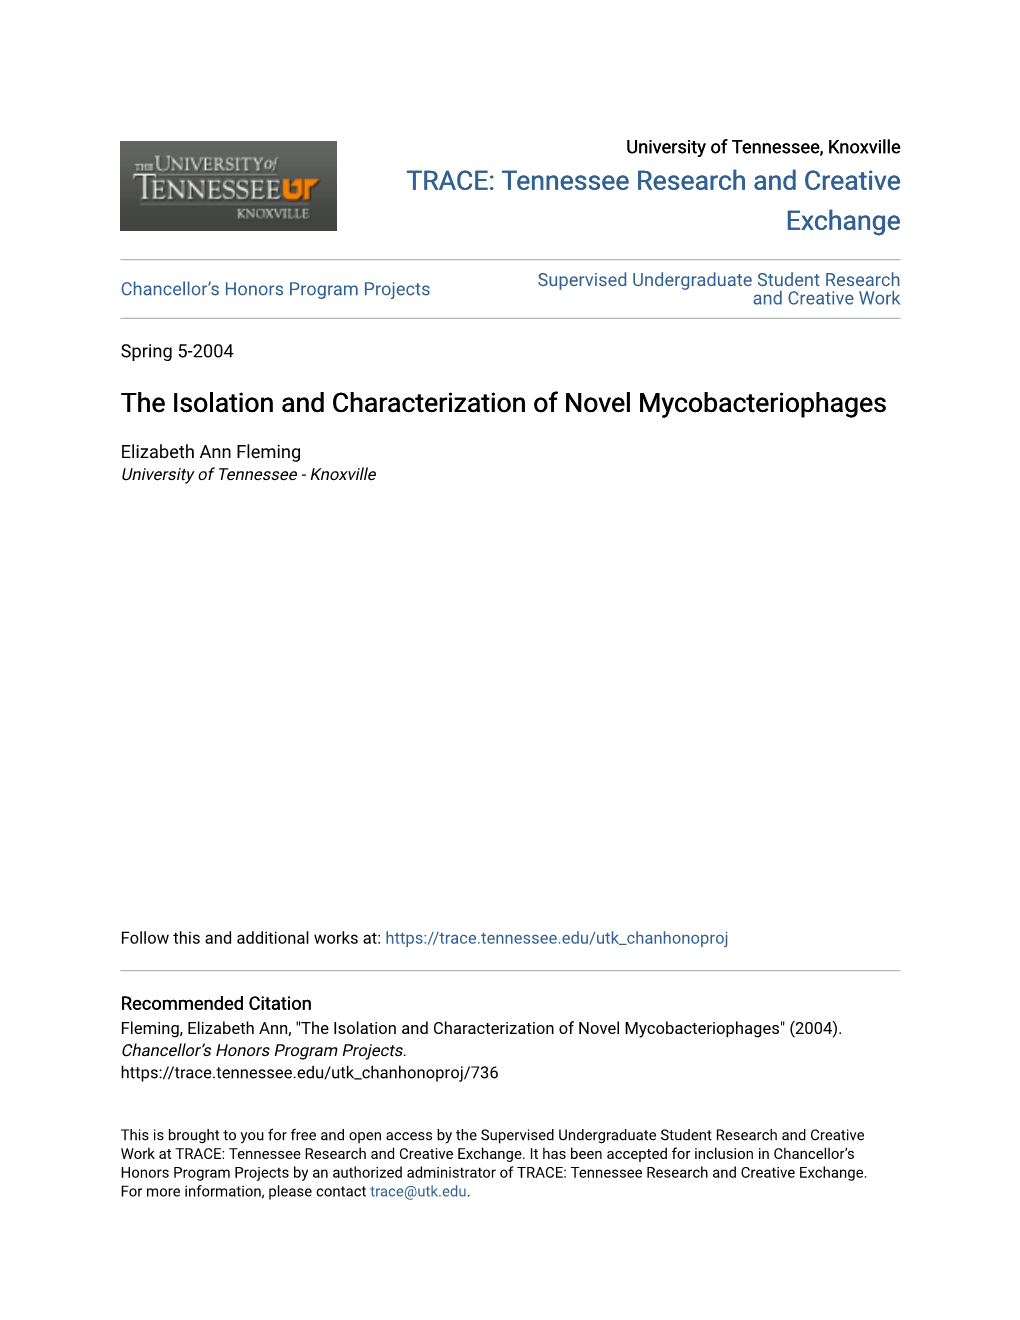 The Isolation and Characterization of Novel Mycobacteriophages